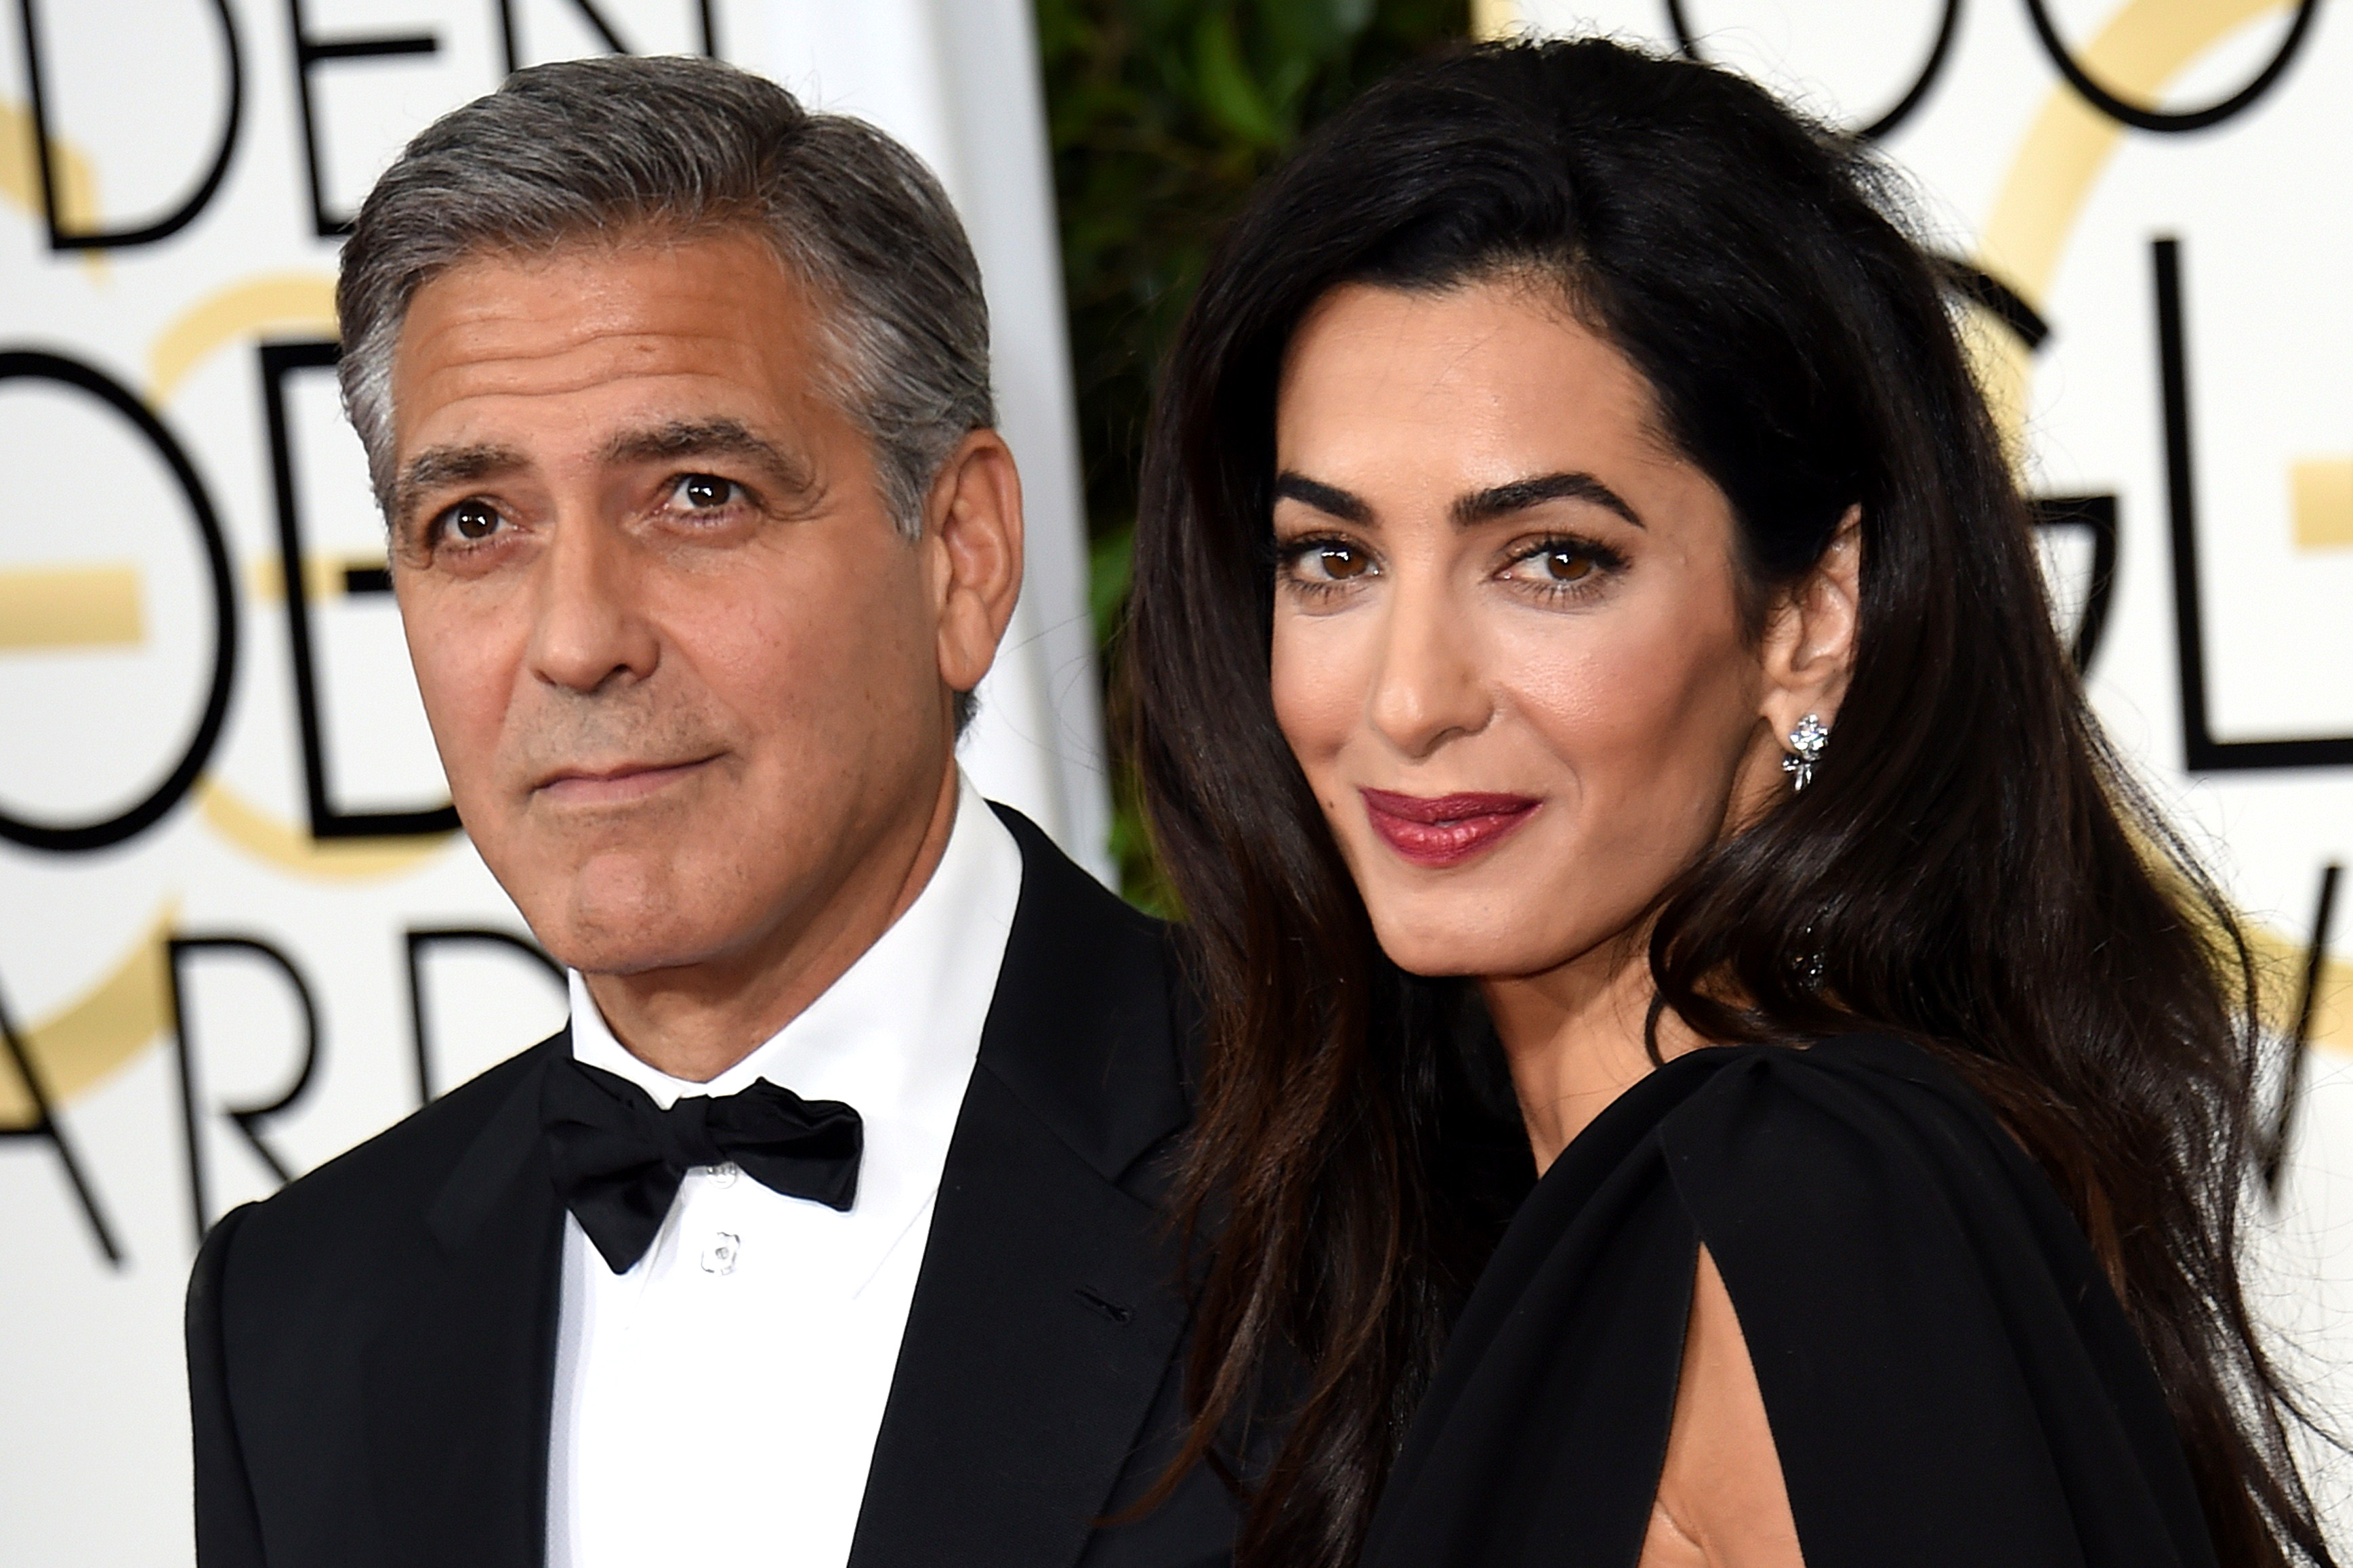 Actor George Clooney (L) and Amal Clooney arrive on the red carpet for the 72nd annual Golden Globe Awards, January 11, 2015 at the Beverly Hilton Hotel in Beverly Hills, California. AFP PHOTO/MARK RALSTONMARK RALSTON/AFP/Getty Images